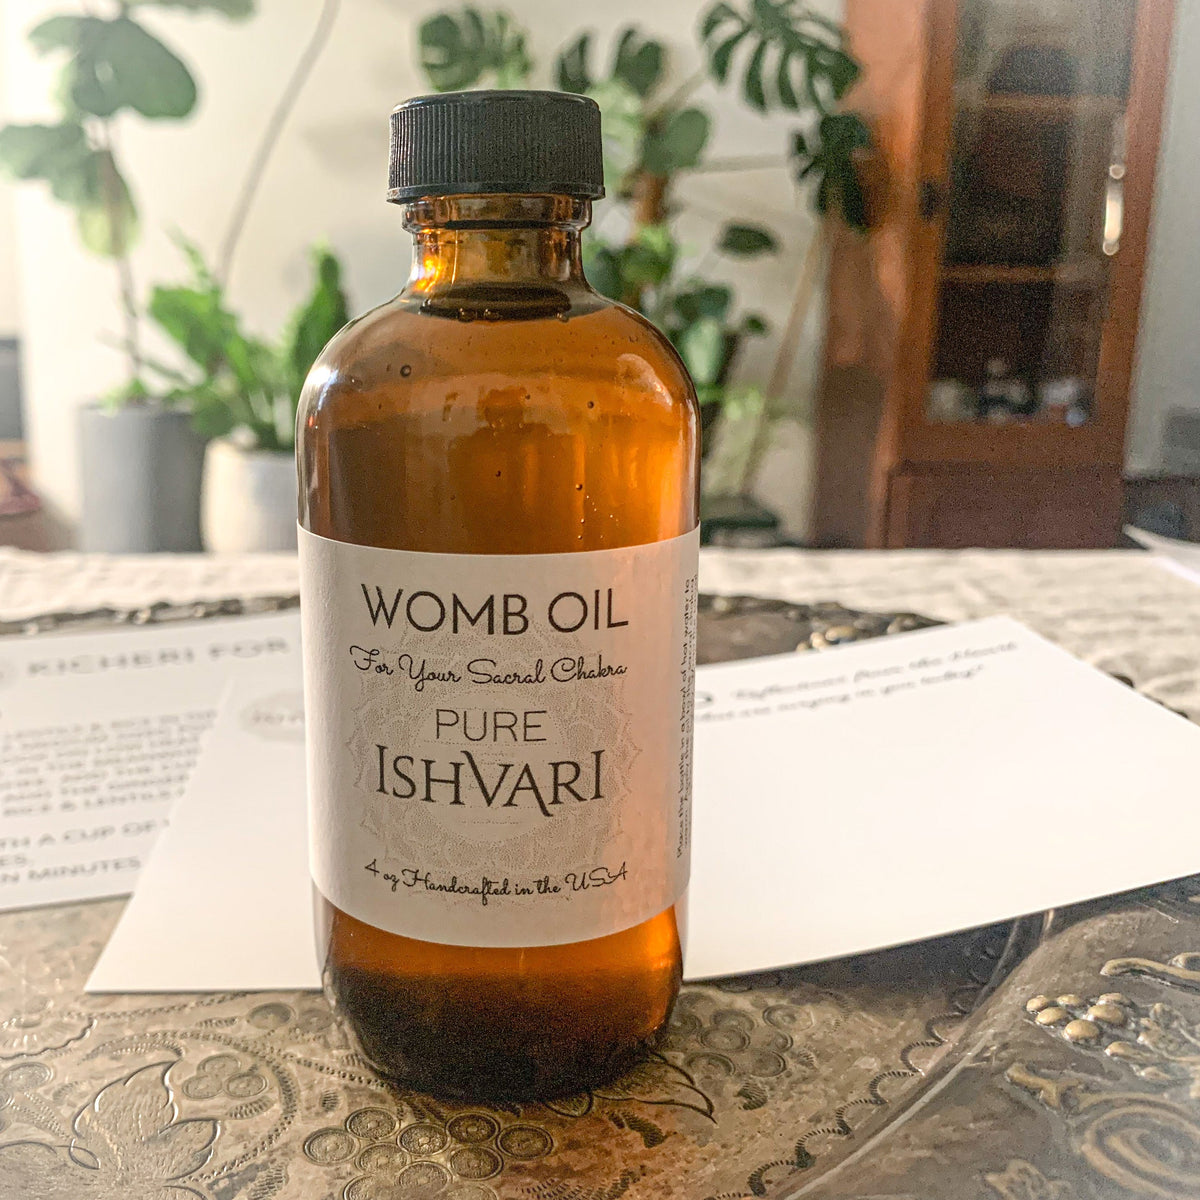 WOMB OIL - FOR SACRAL CHAKRA